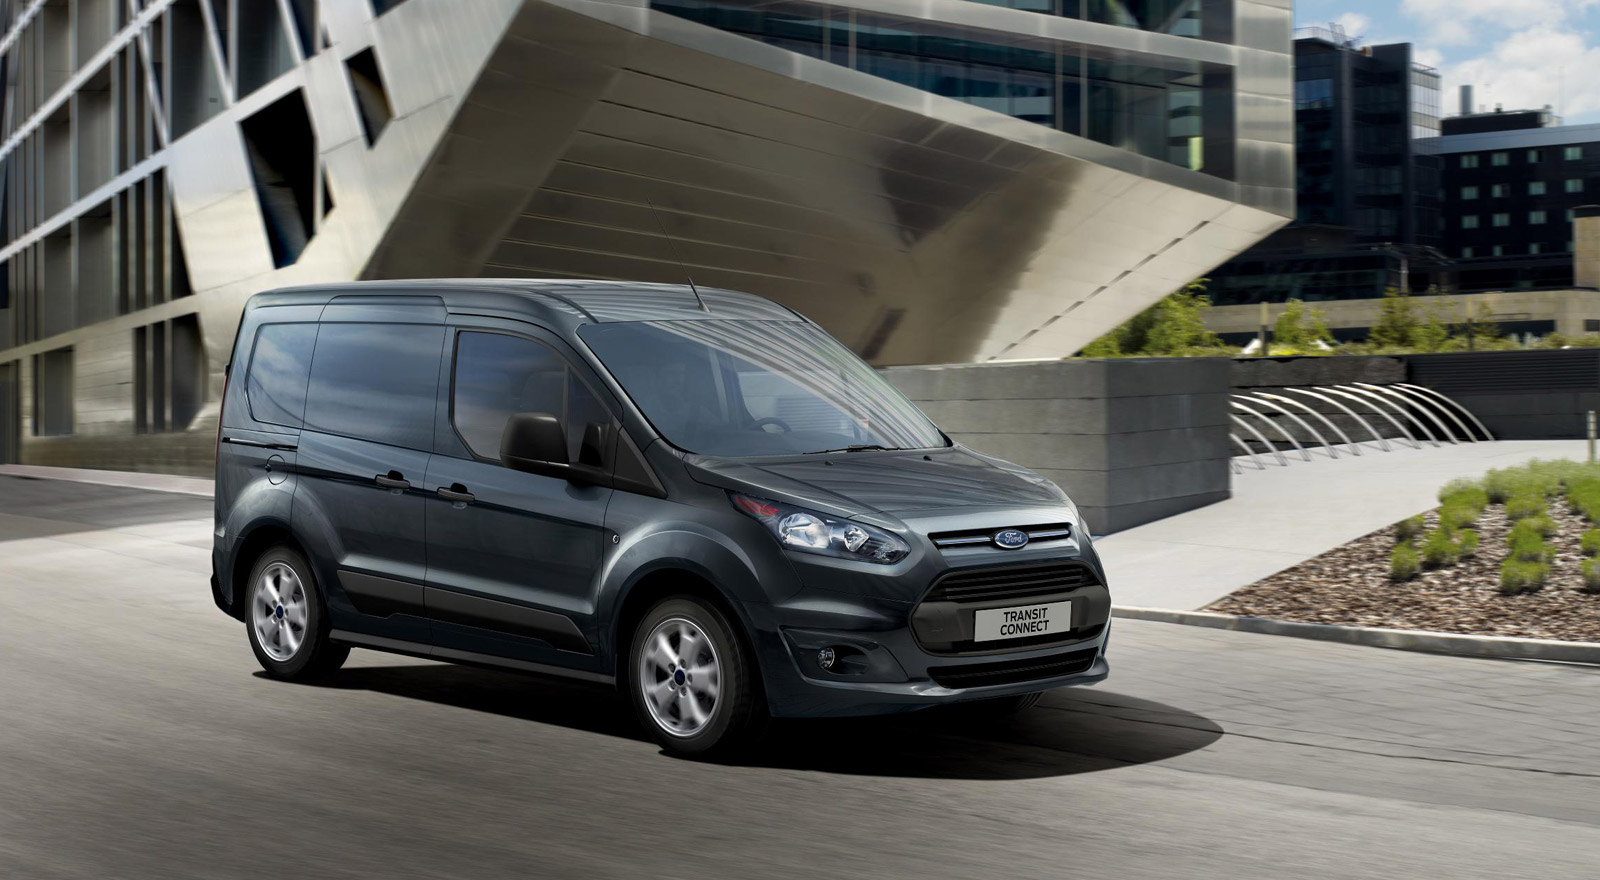 2014 Ford Transit Connect Unveiled, New Compact Delivery Van